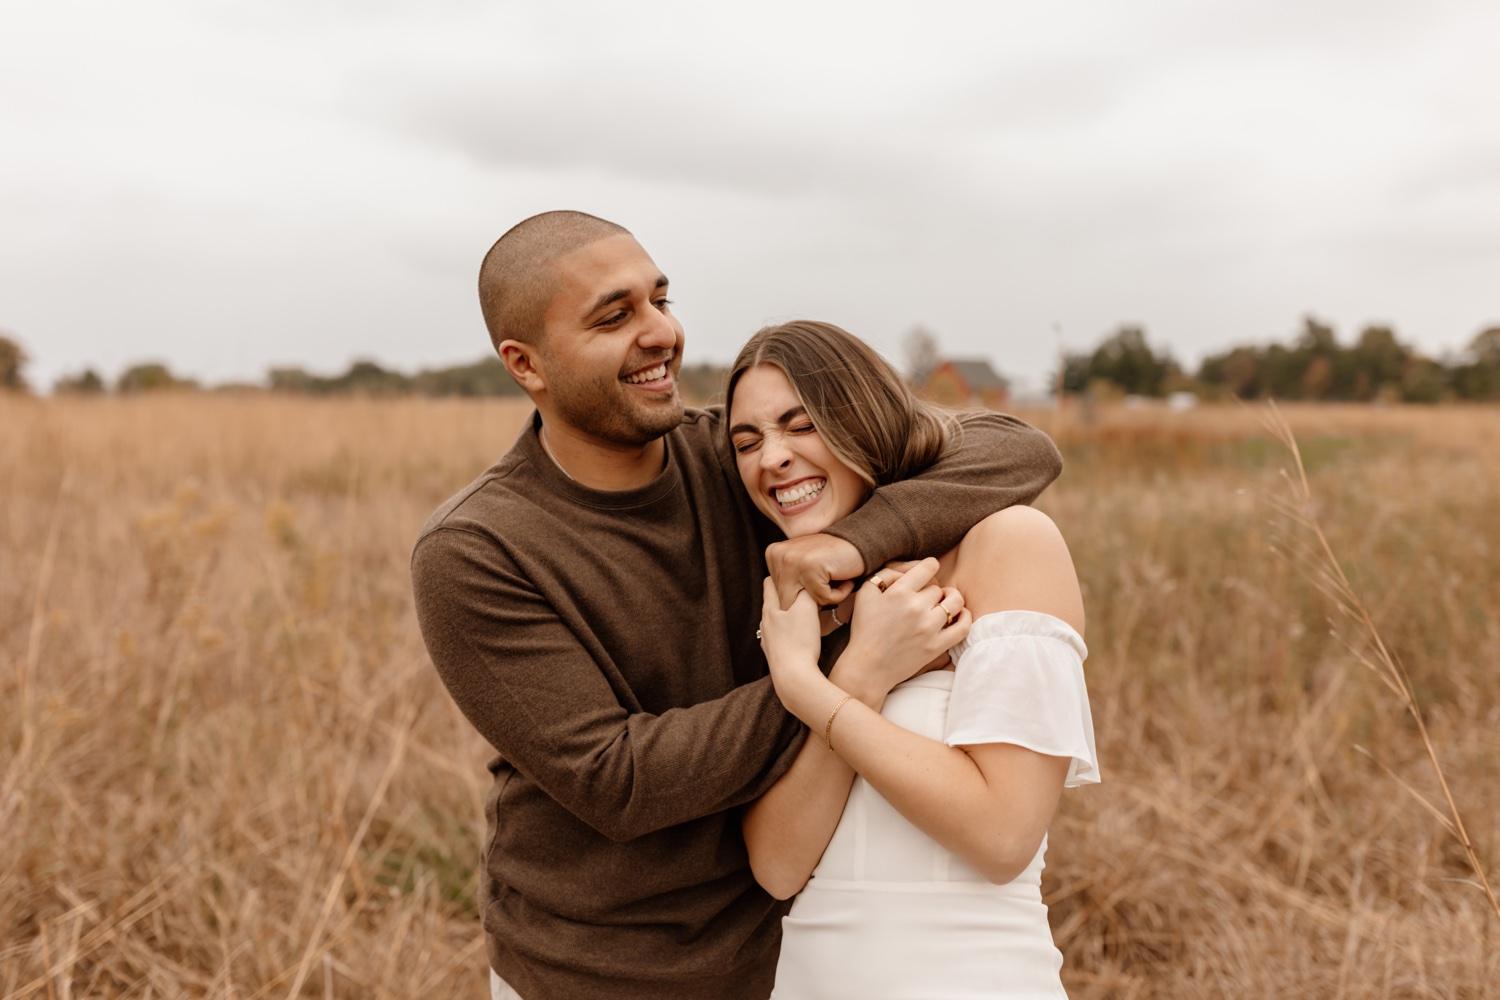 What to Wear for a Couples Photoshoot in the Fall